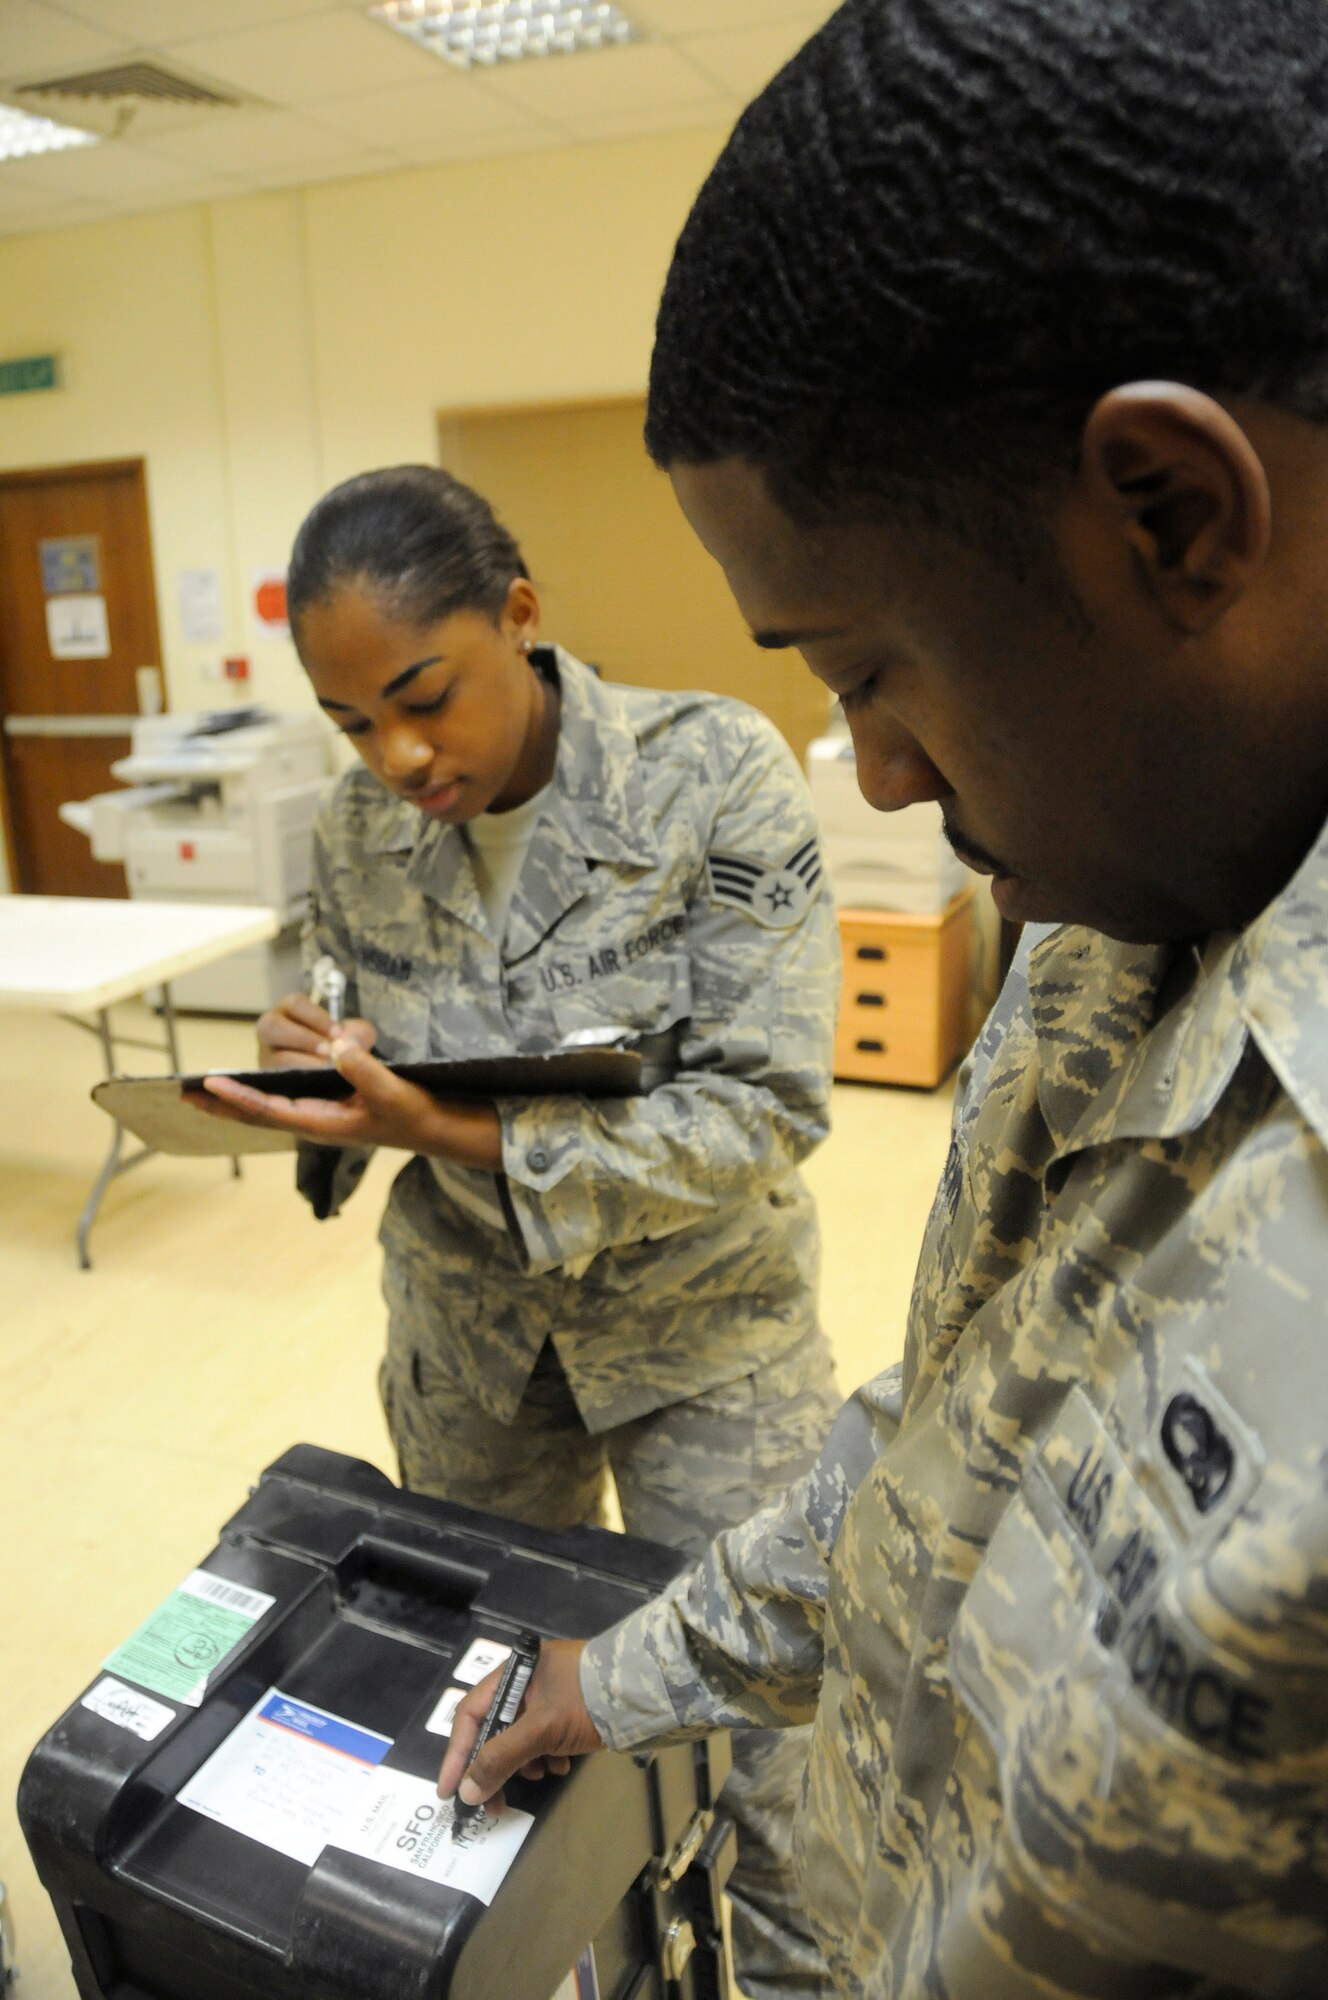 Senior Airman Ashley Hanshaw writes the weight onto a weight management sheet for manifest while Senior Airman Nimani Brown marks the weight on the package for outgoing mail Nov. 21, at an undisclosed air base in Southwest Asia. Both Airmen are postal specialists deployed to the 379th Expeditionary Communications Squadron in support of Operations Iraqi and Enduring Freedom and Joint Task Force-Horn of Africa. The ability to send and receive mail through the U.S. Postal System is an incredible morale boost for deployed members here.  Airman Hanshaw, a native of Bronx, N.Y., is deployed from Dobbins Air Reserve Base, Ga., and Airman Brown, a native of Chicago, Ill., is deployed from Ramstein Air Base, Germany.  (U.S. Air Force photo by Staff Sgt. Darnell T. Cannady/Released)